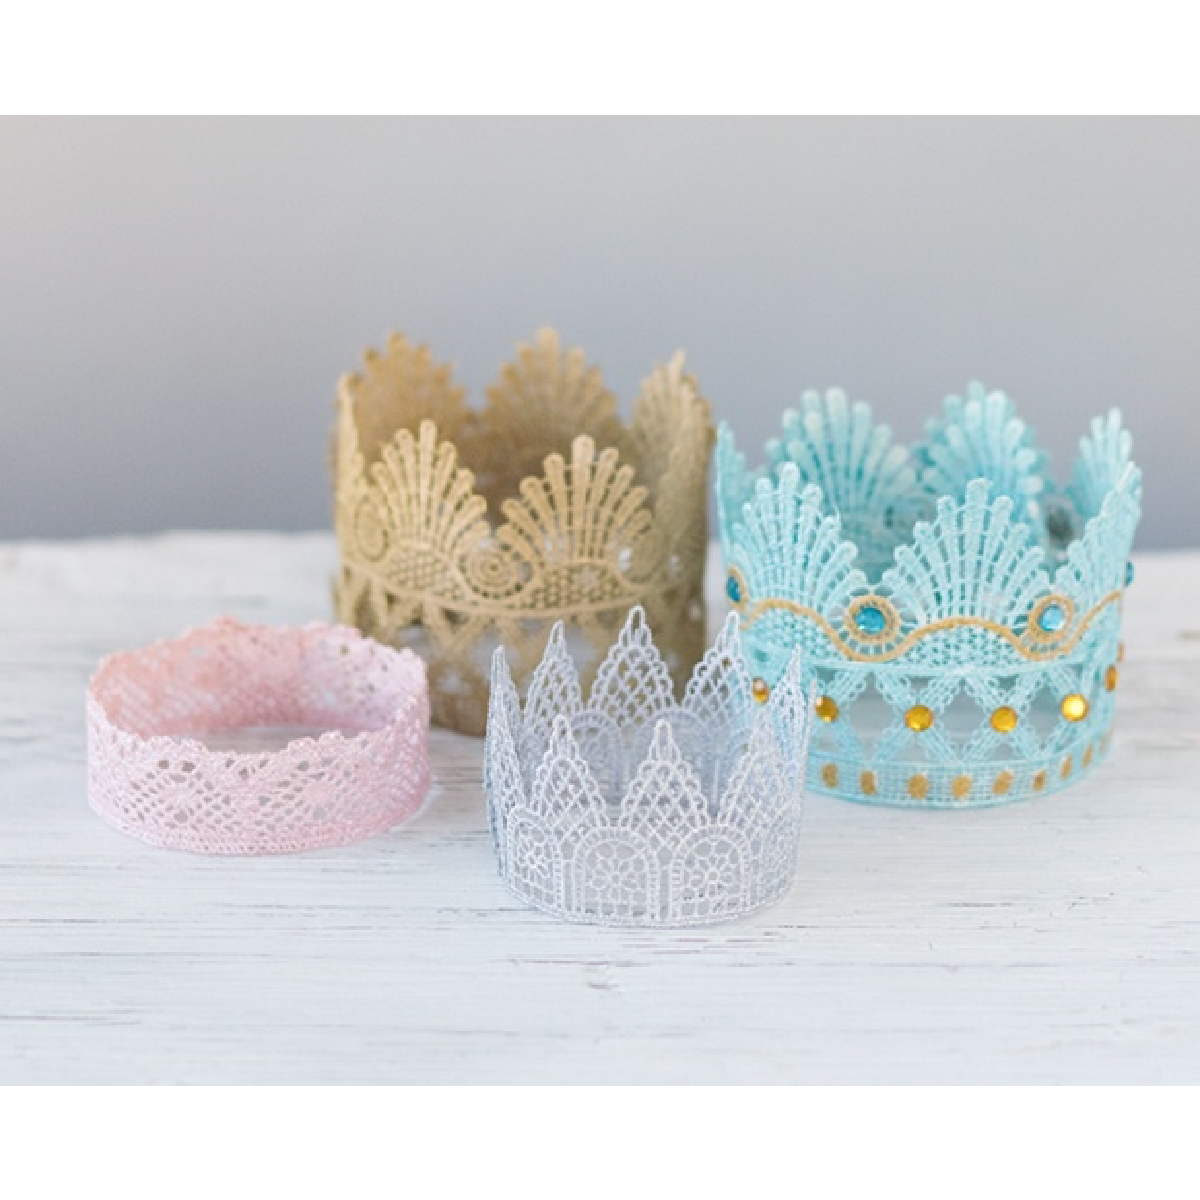 Dress up ideas- blue, gray, gold, and pink lace princess crowns- kids activities blog